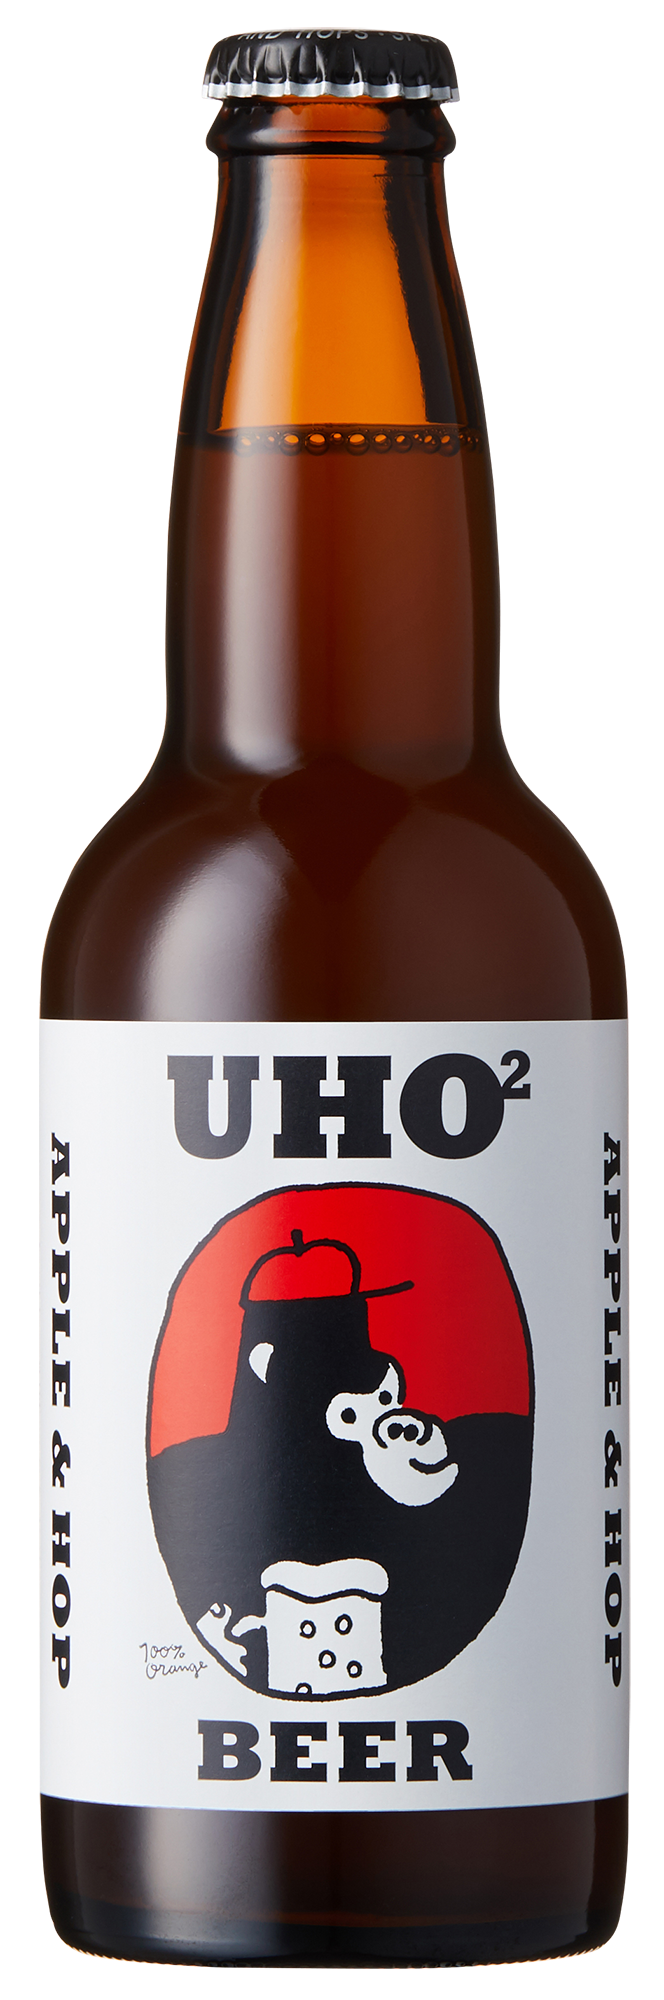 UHO UHO BEER（ウホウホビール）<img class='new_mark_img2' src='https://img.shop-pro.jp/img/new/icons50.gif' style='border:none;display:inline;margin:0px;padding:0px;width:auto;' />